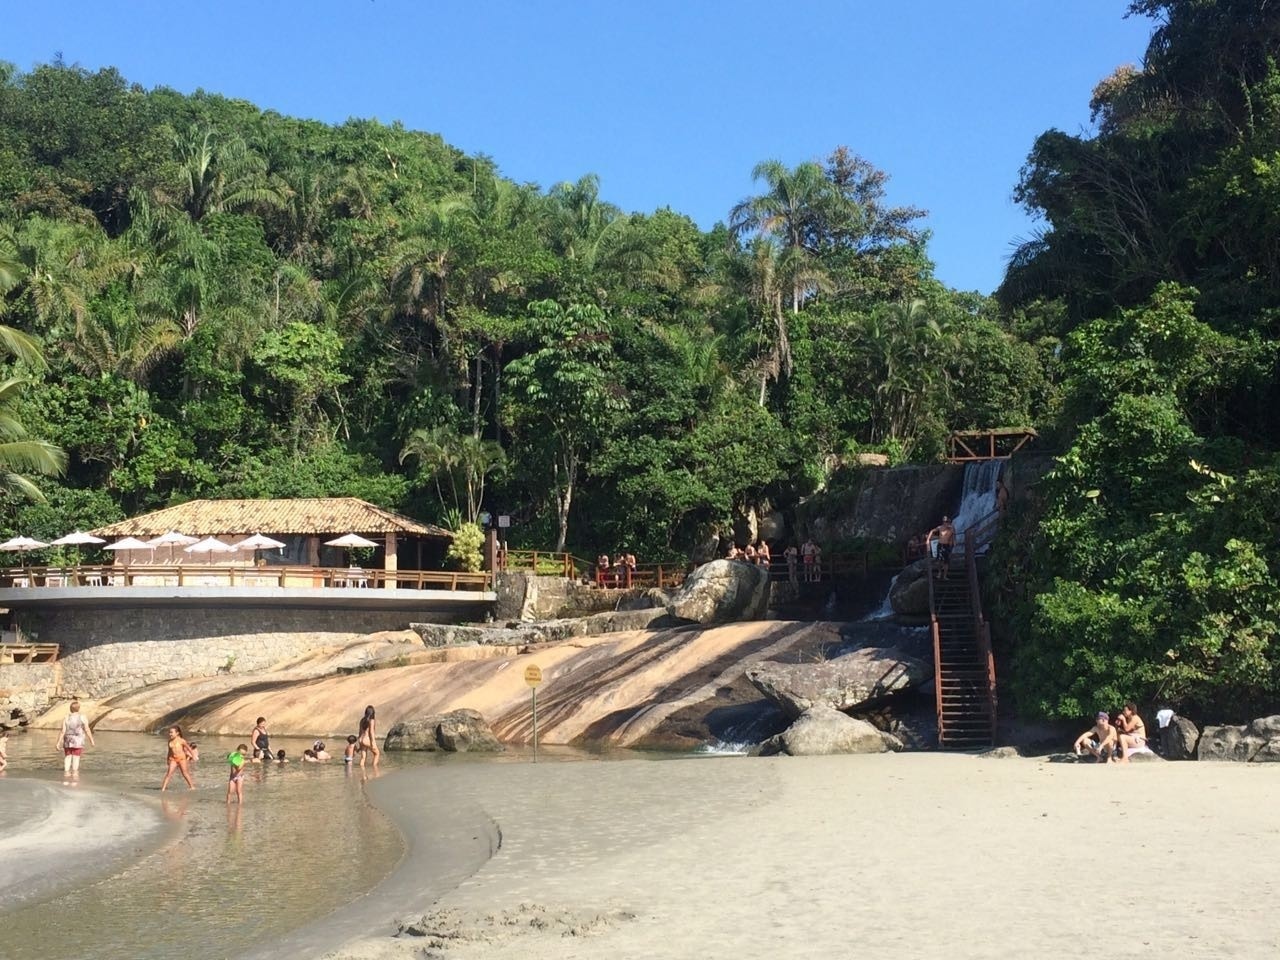 #LifeAtExpedia

#PraiadeIporanga is located at #Guaruja in the state of Sao Paulo.

You can see and enter in a waterfall in front of the beach!